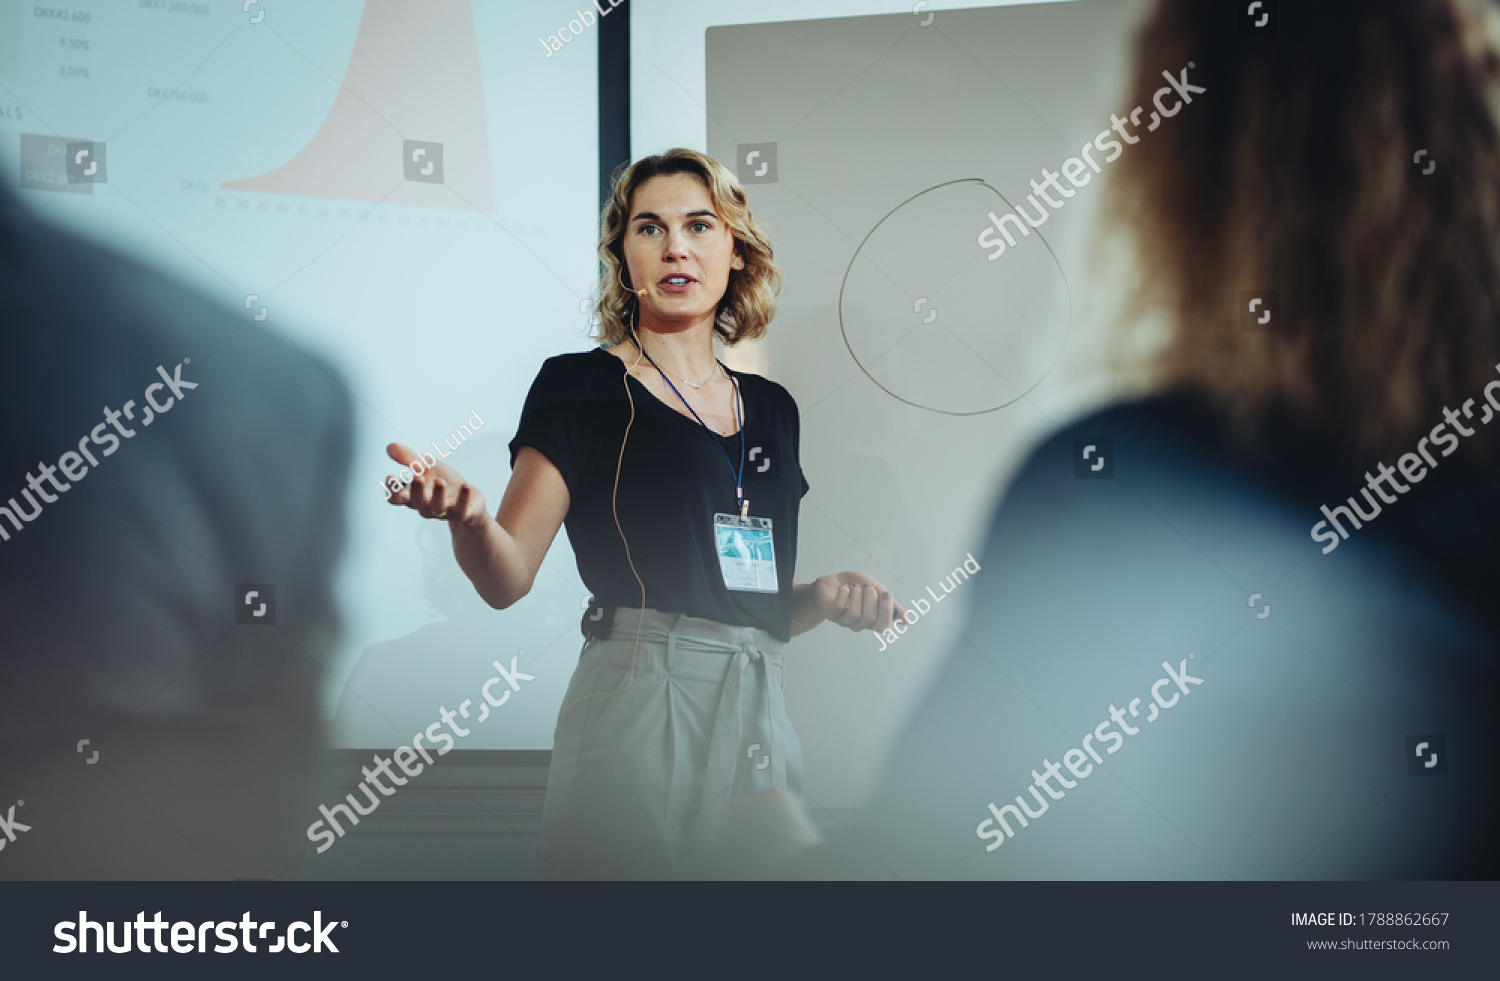 Woman presenting her idea to colleagues in meeting. Businesswoman public speaking in a conference meeting. #1788862667